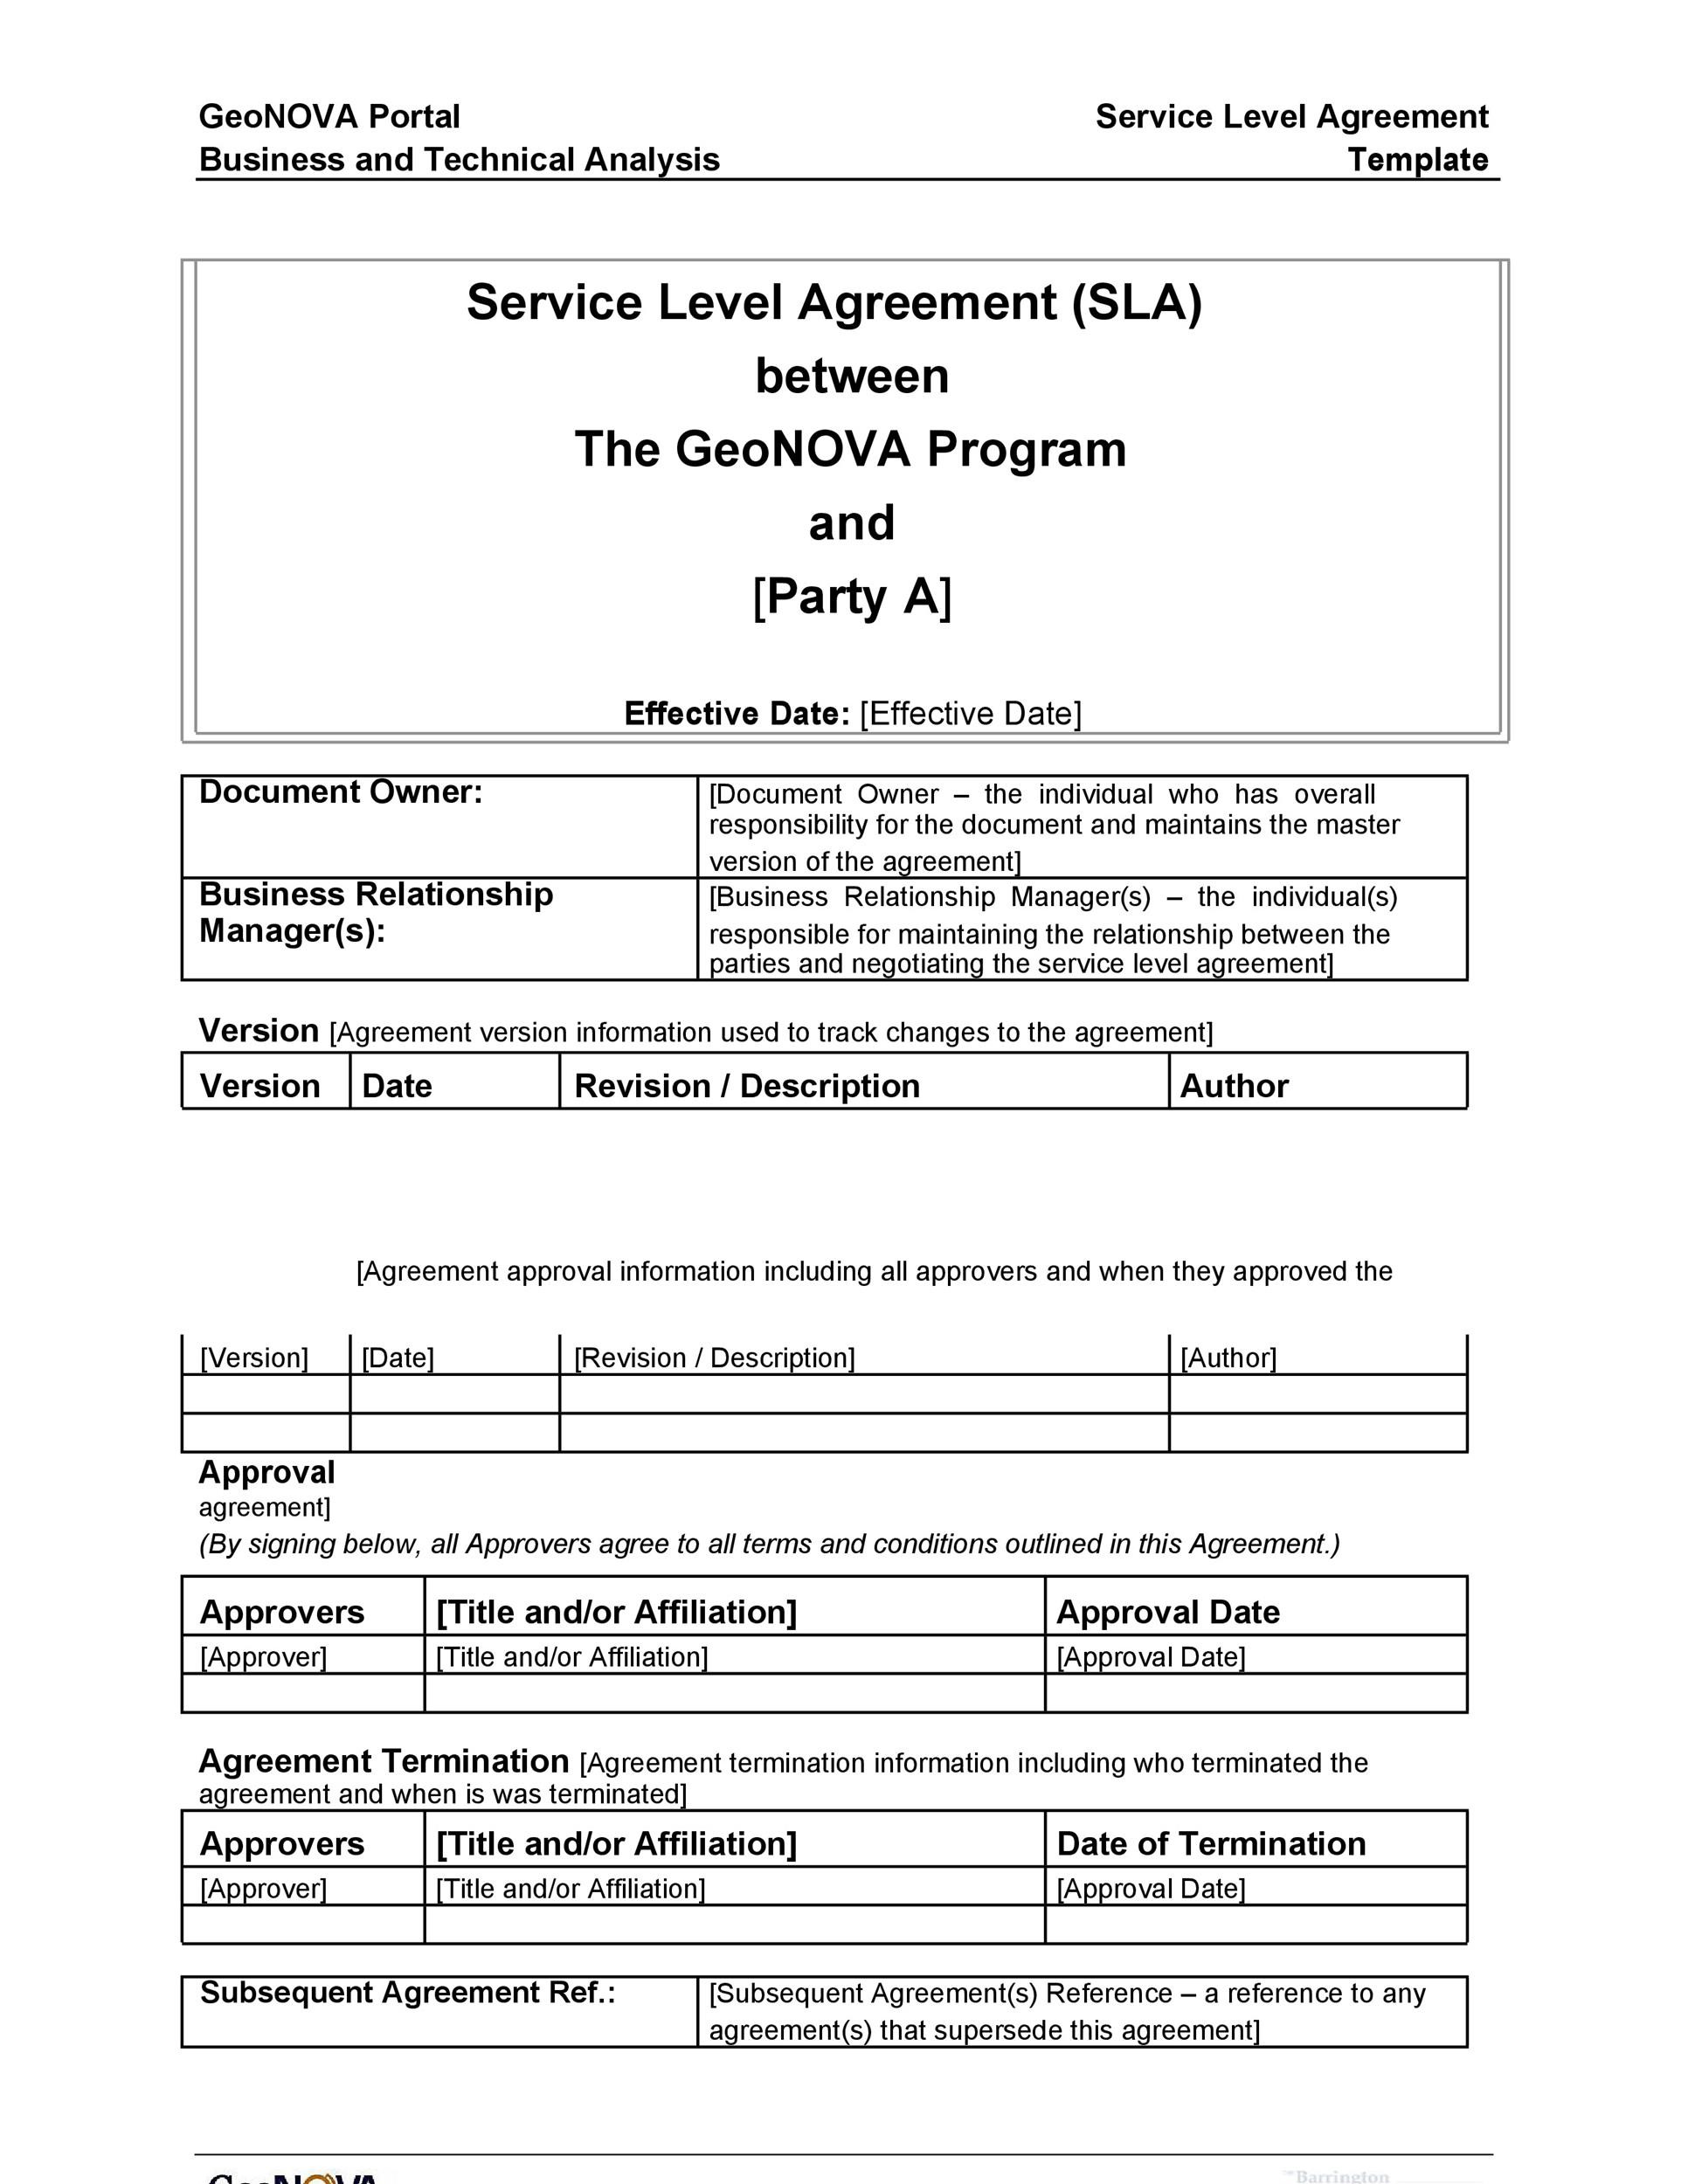 50+ Professional Service Agreement Templates & Contracts